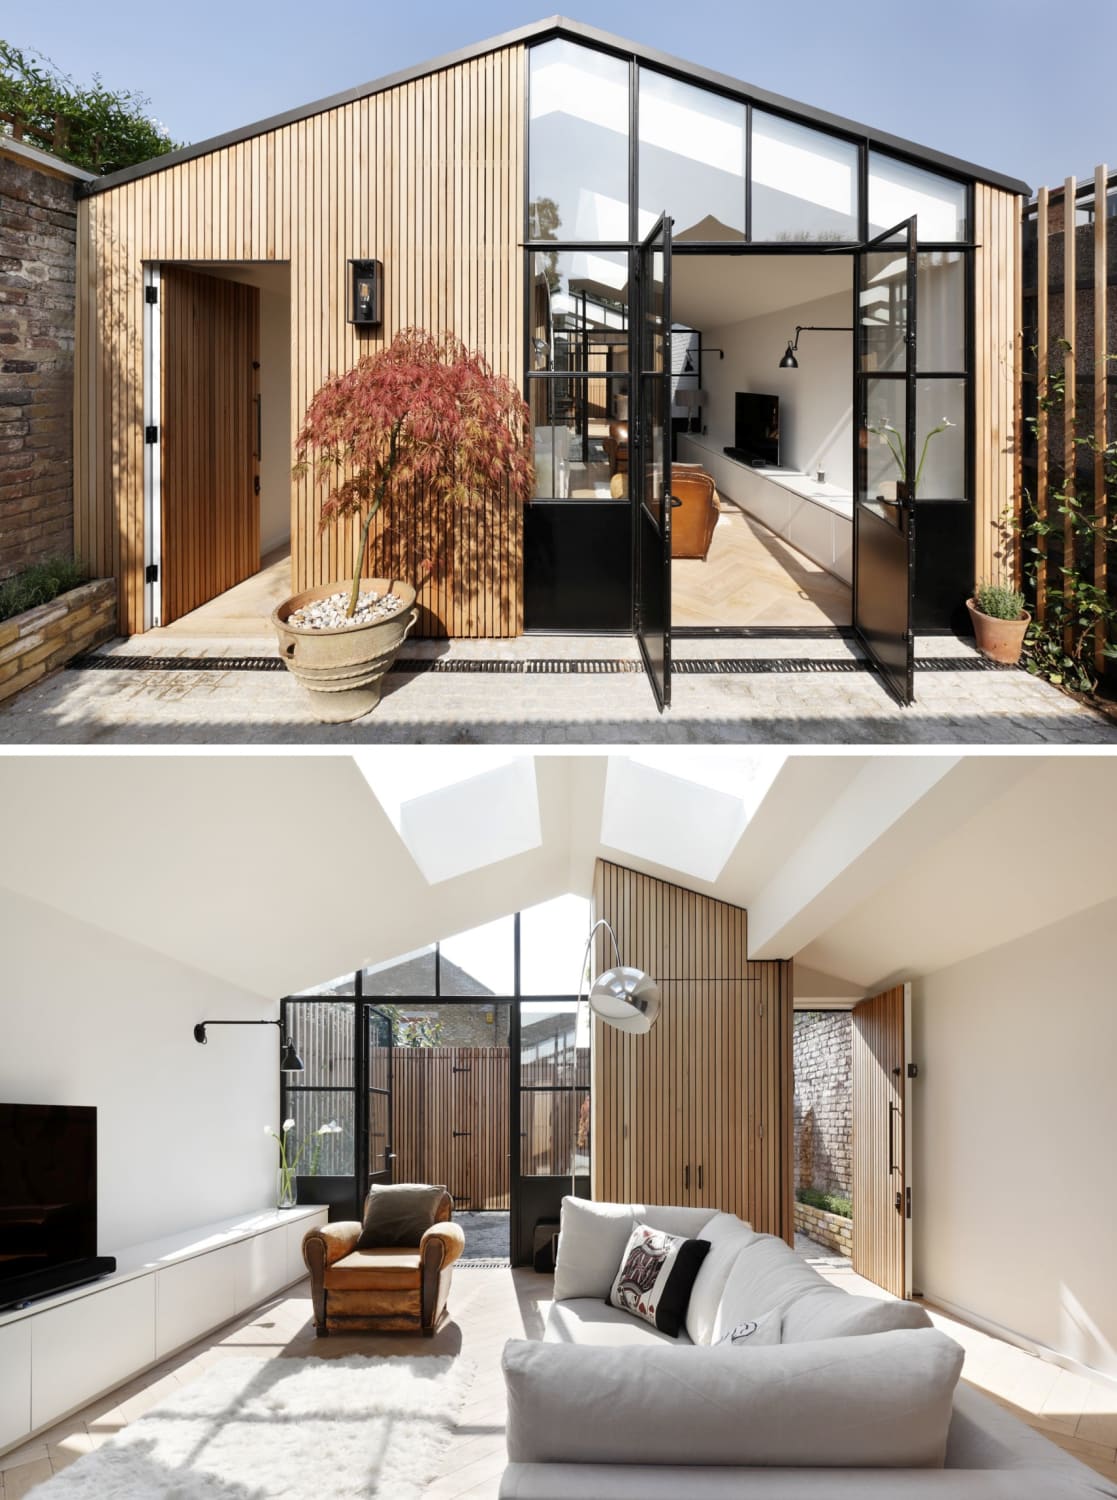 Living room with skylights in a former timber shed turned house, London, UK by De Rosee Sa